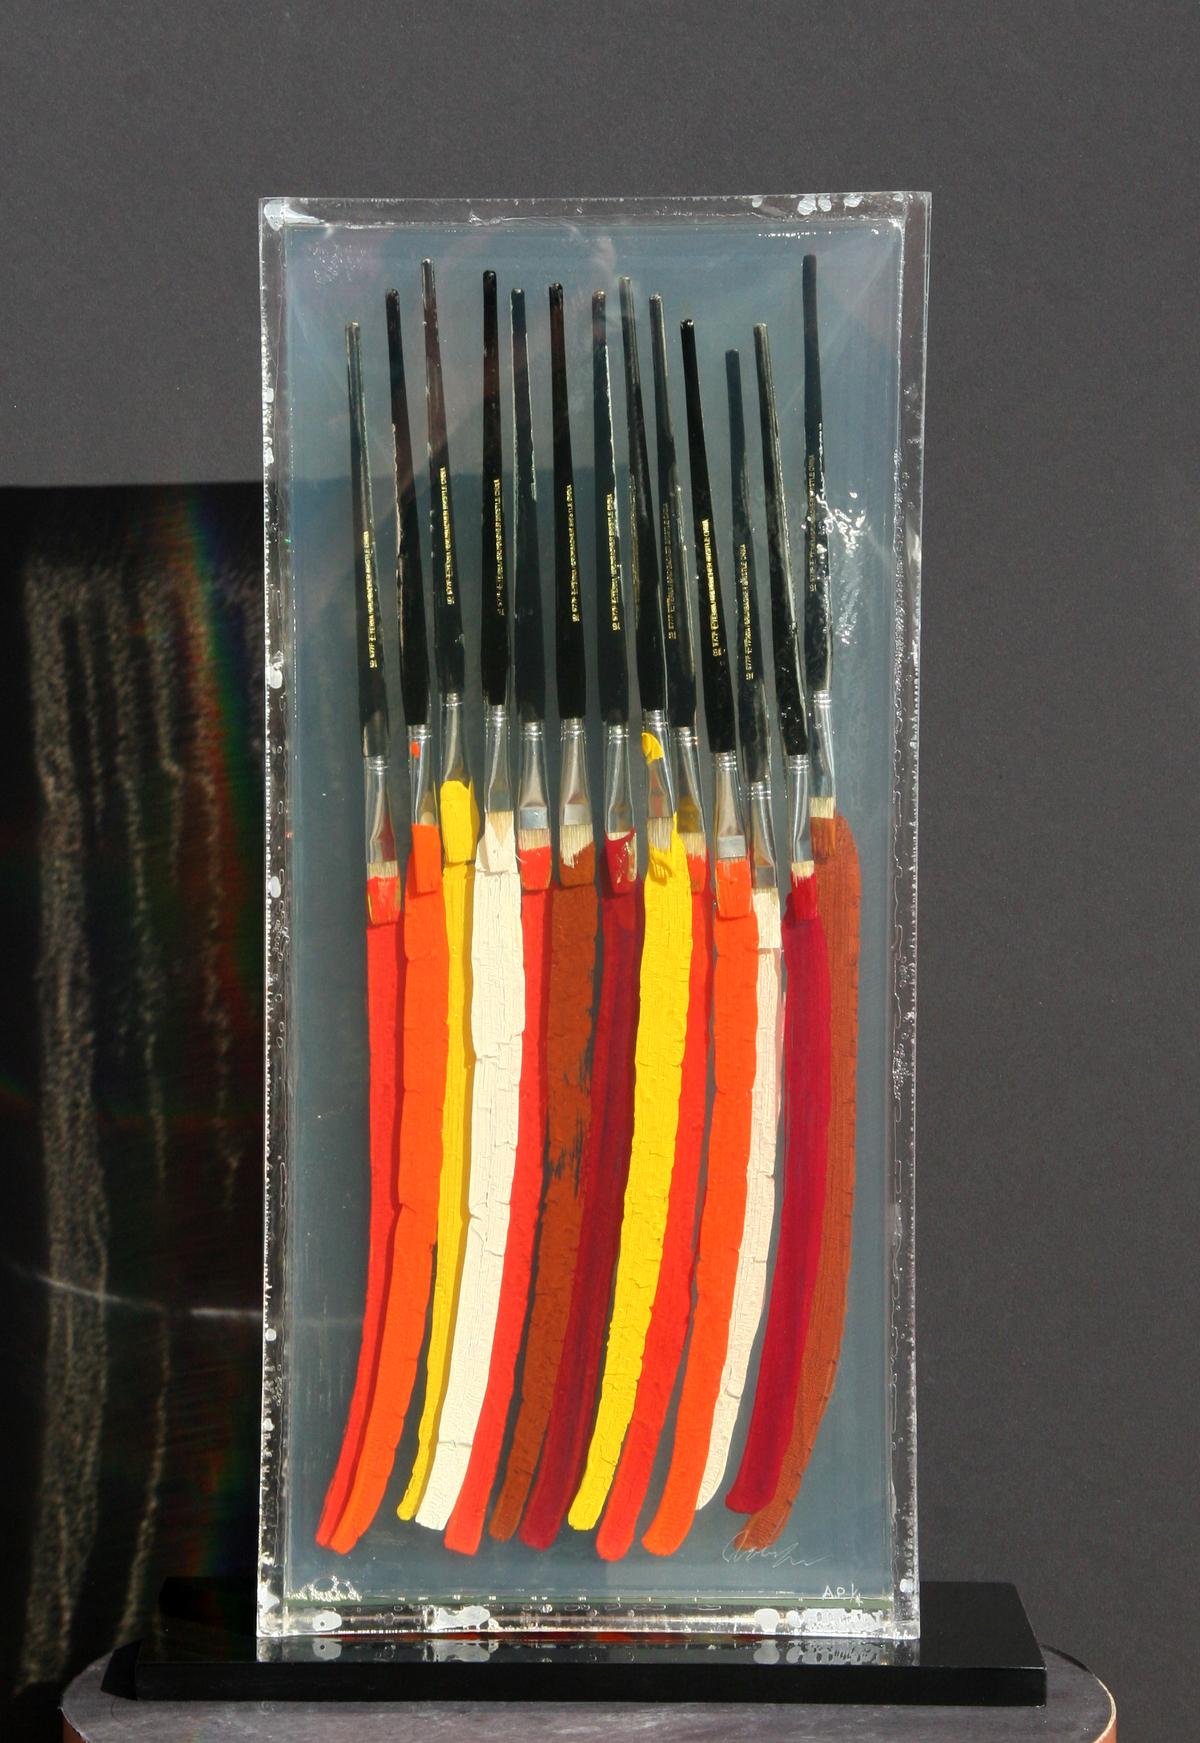 Artist: Arman, French/American (1929 - 2005)
Title: Paintbrushes II
Year: 1991
Medium: Paintbrushes and Oil Paint in Epoxy Resin Sculpture, Signature and number inscribed
Edition: 20, AP 1/4
Size: 27 x 12 x 2.5 inches